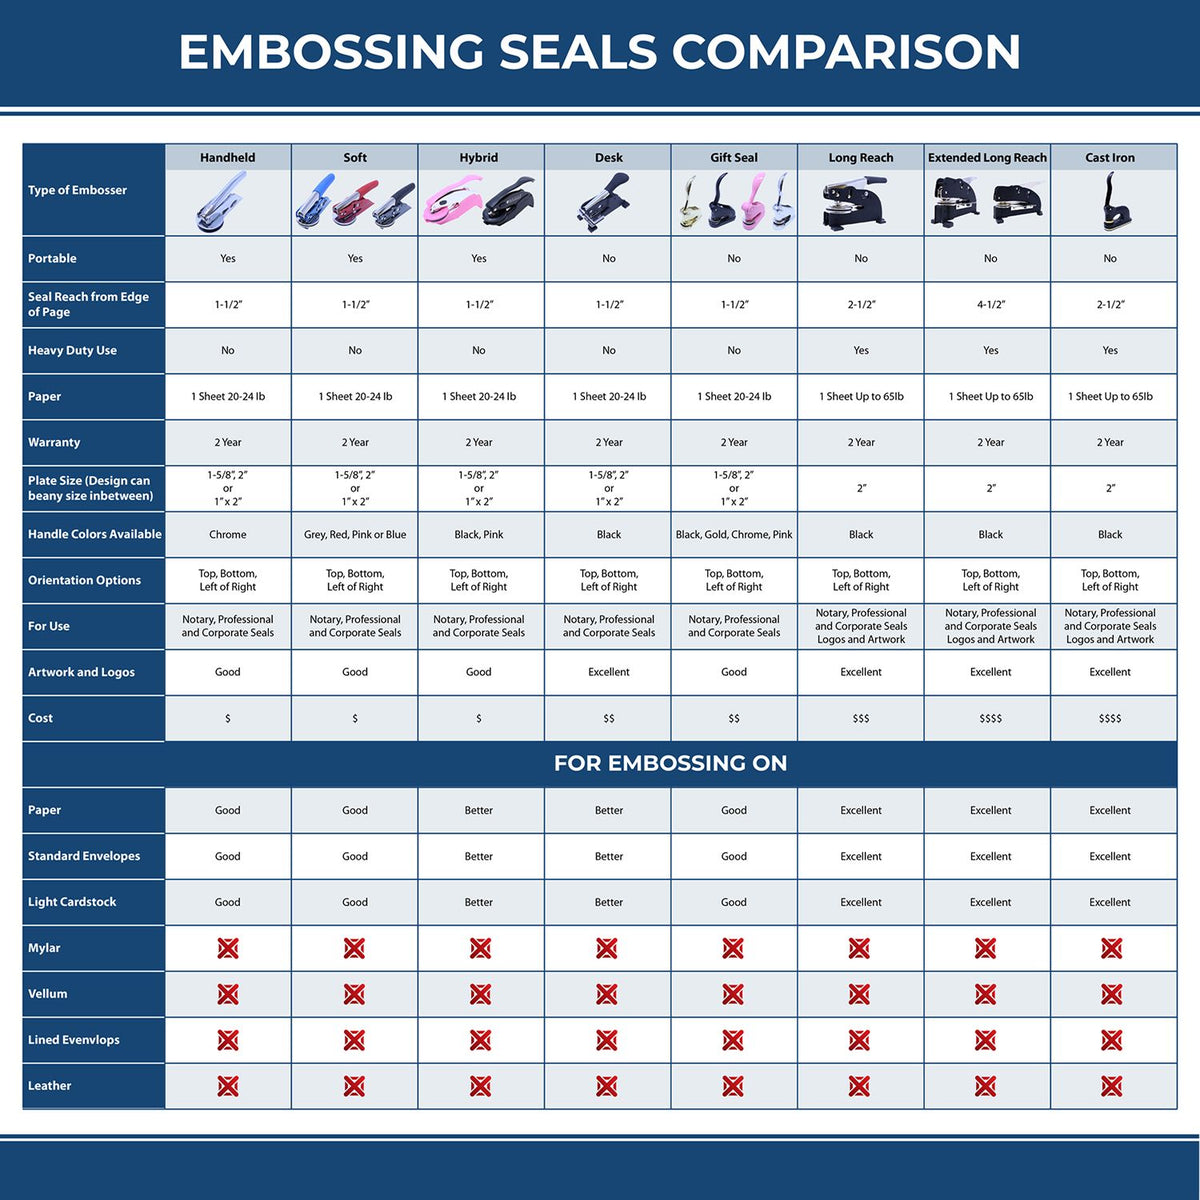 A comparison chart for the different types of mount models available for the Gift Washington Landscape Architect Seal